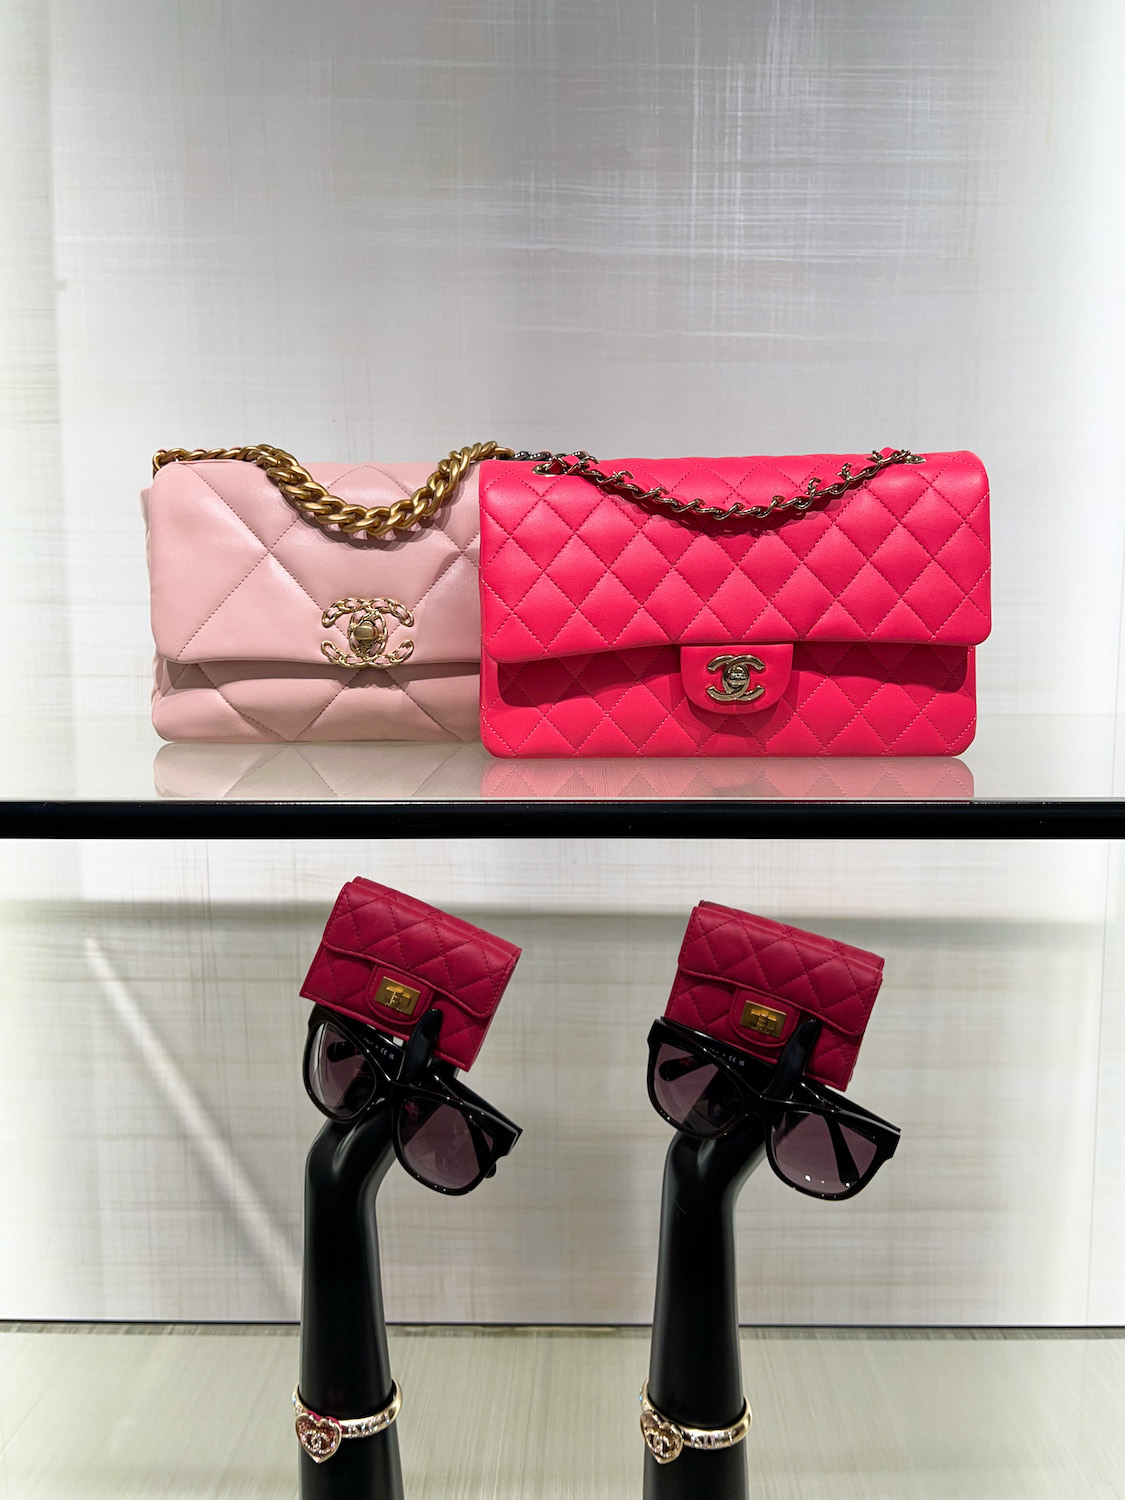 How to Save on Chanel in Paris + Shopping Experience - Modern Mollie